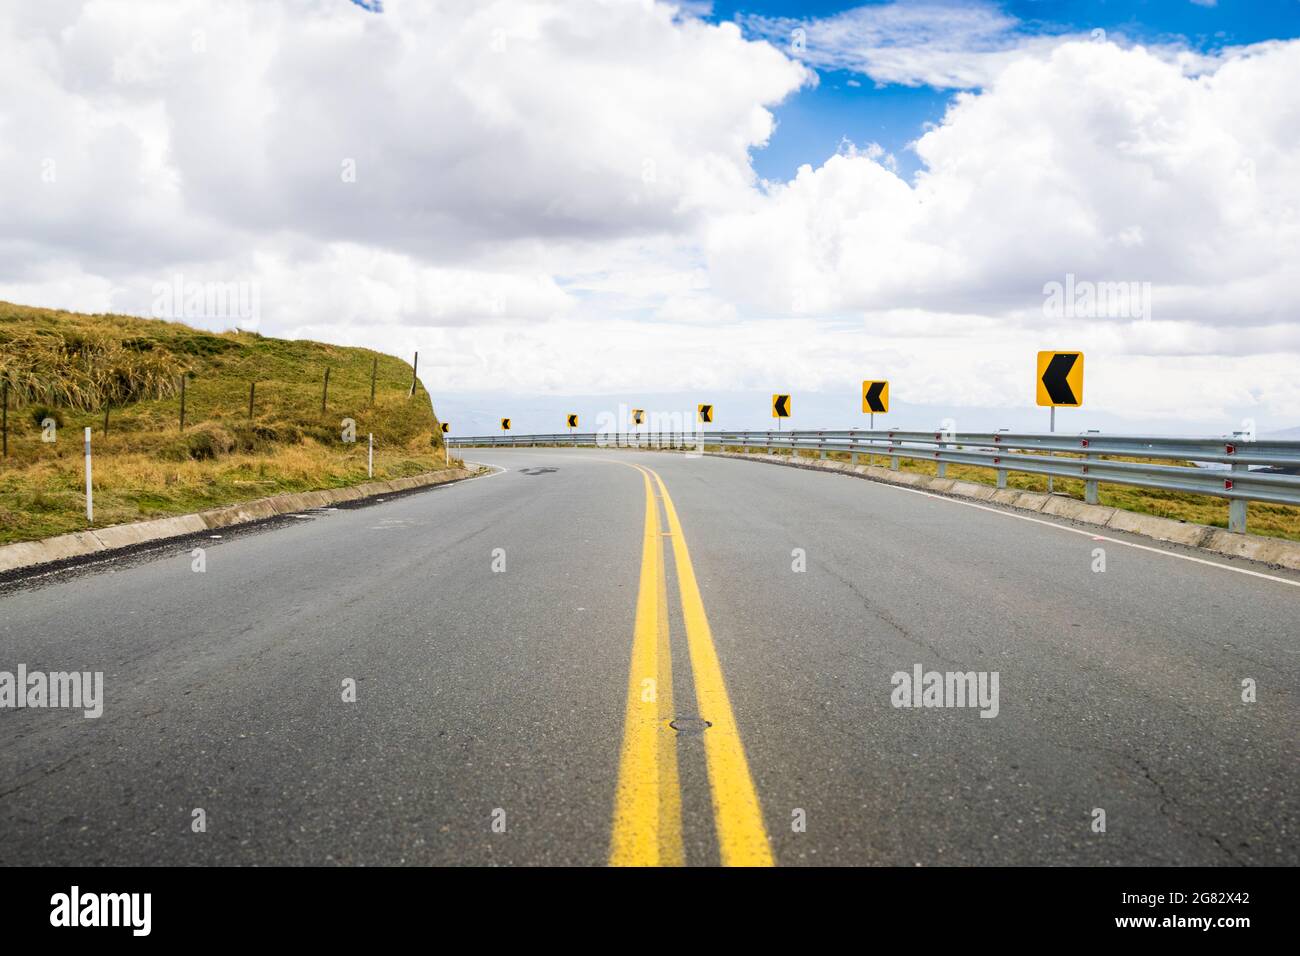 Highway in the mountains with a blue sky with some clouds. Street signs that indicate a curve. Stock Photo